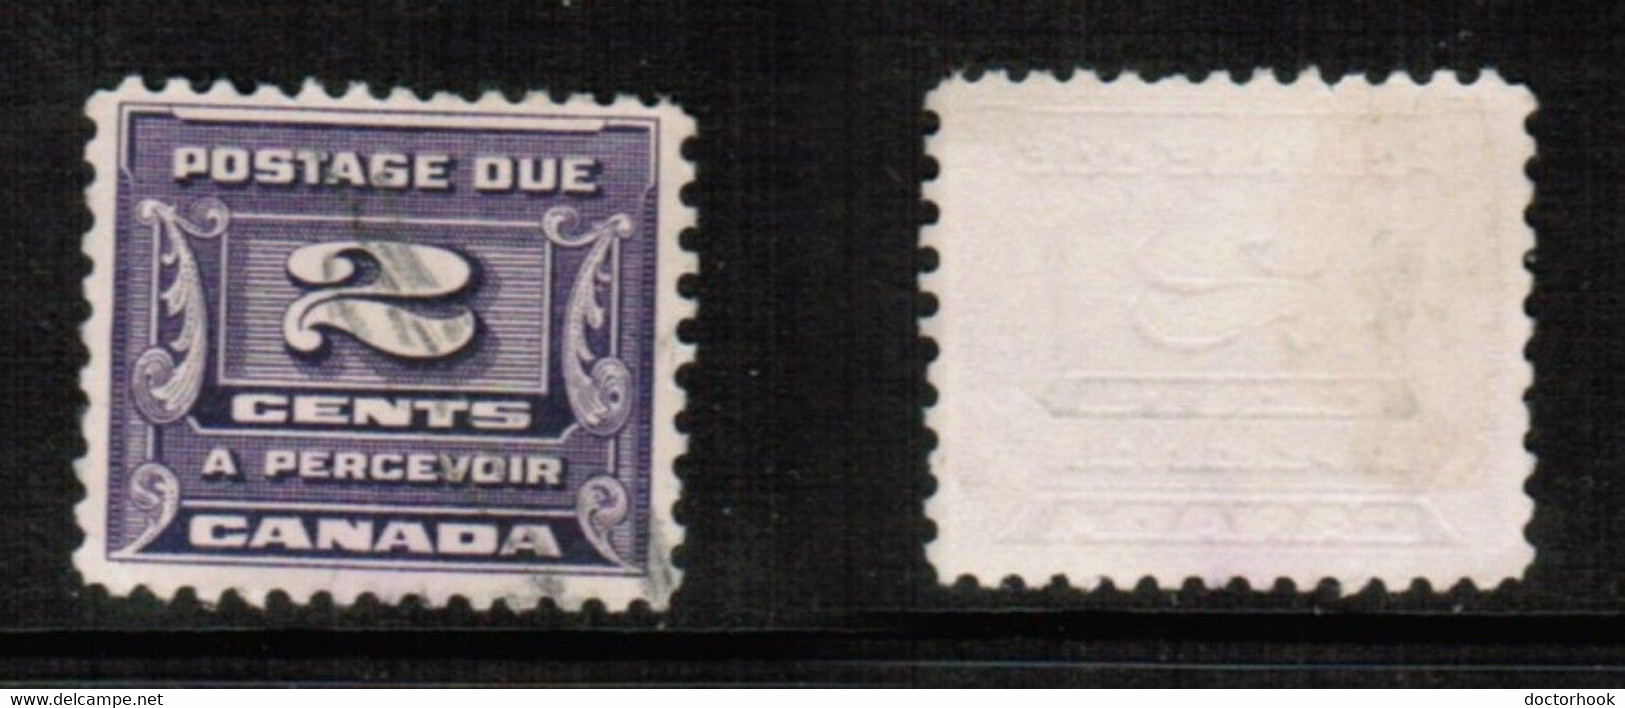 CANADA   Scott # J 12 USED (CONDITION AS PER SCAN) (CAN-125) - Port Dû (Taxe)